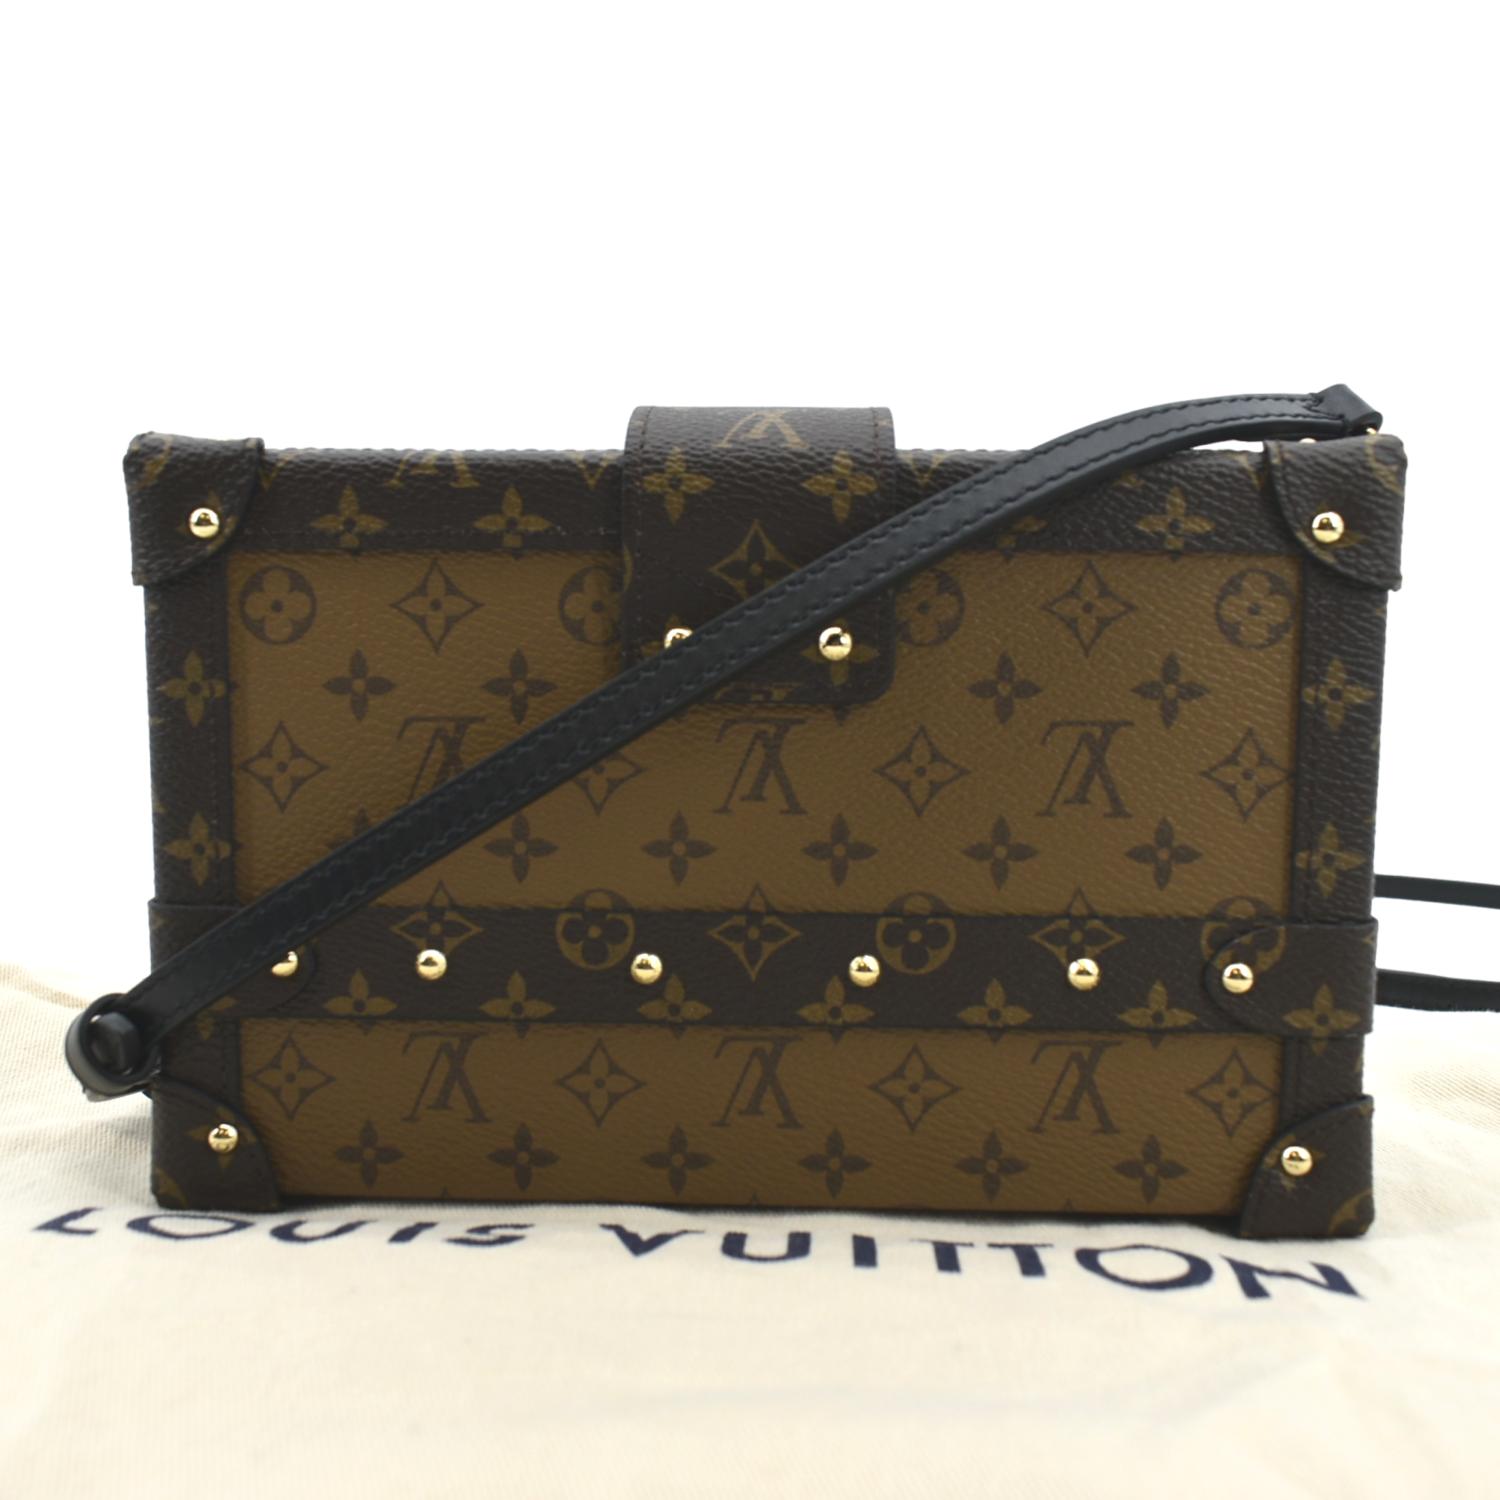 Louis Vuitton Petite Malle V, Brown, One Size